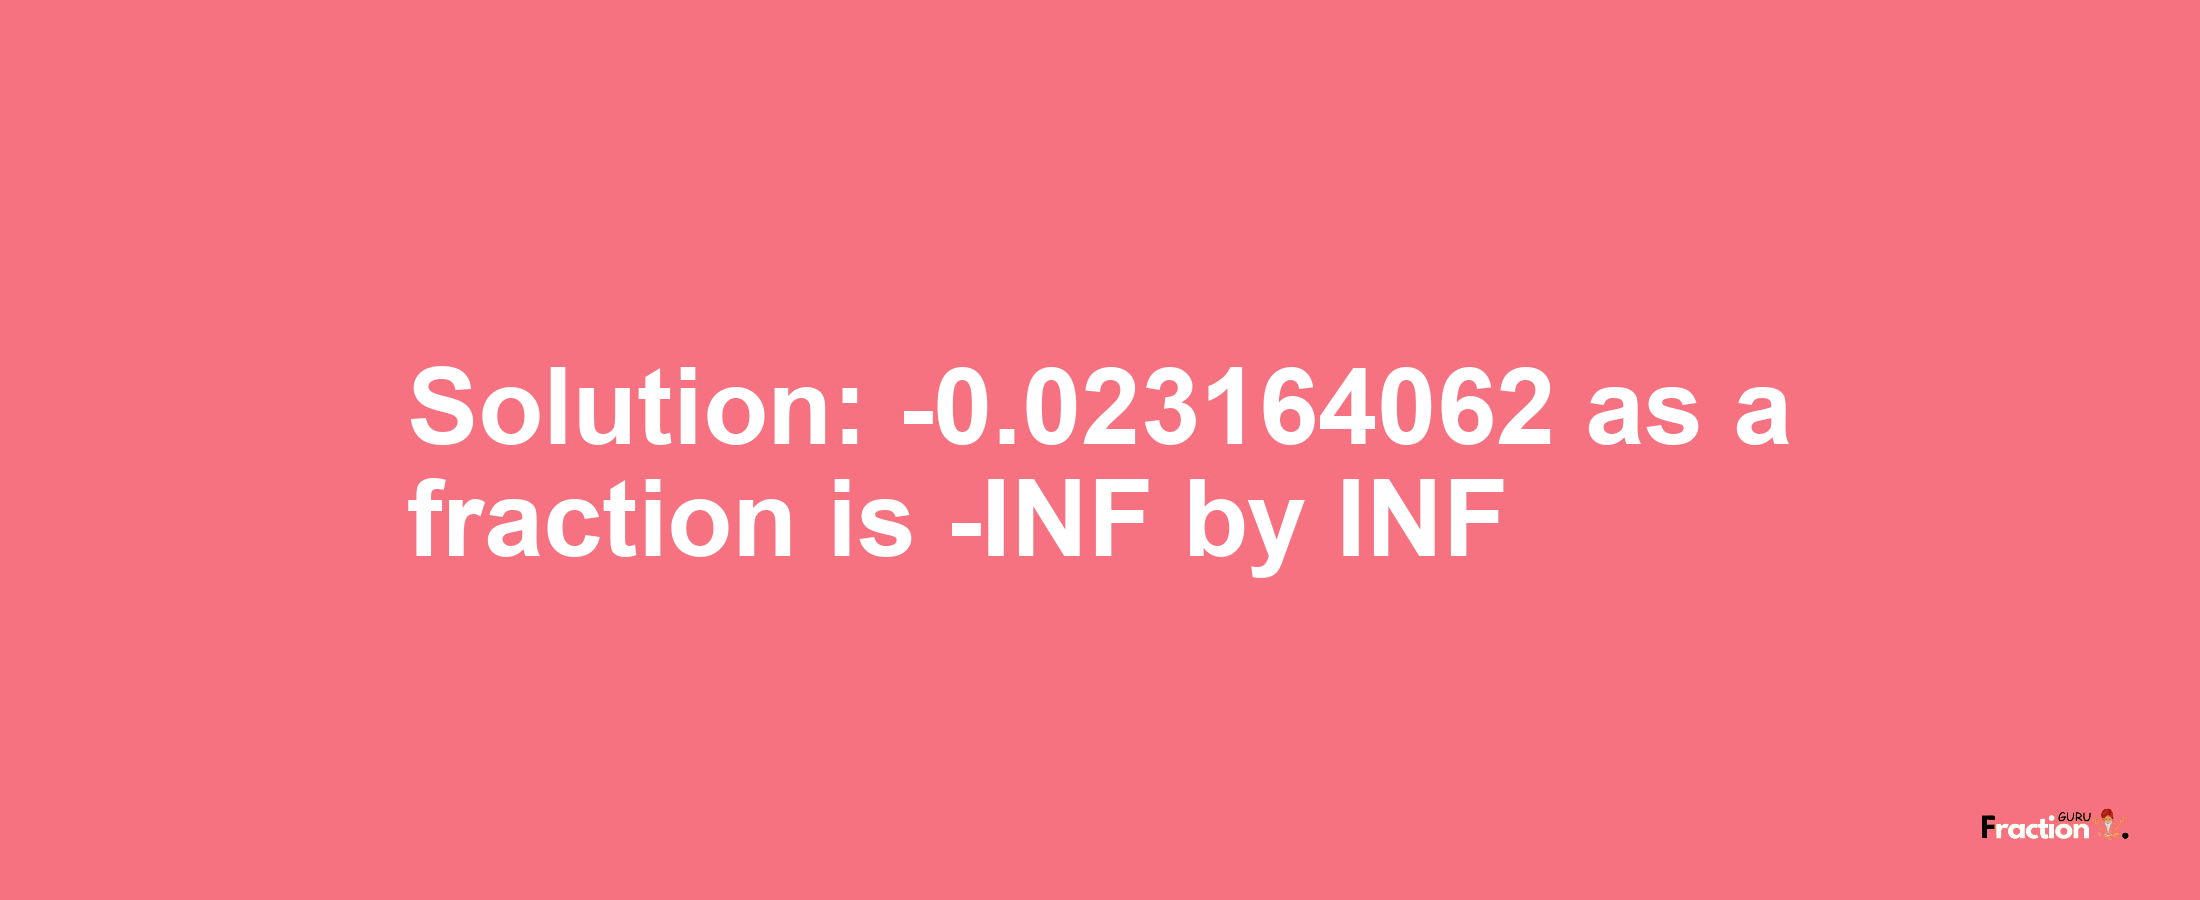 Solution:-0.023164062 as a fraction is -INF/INF